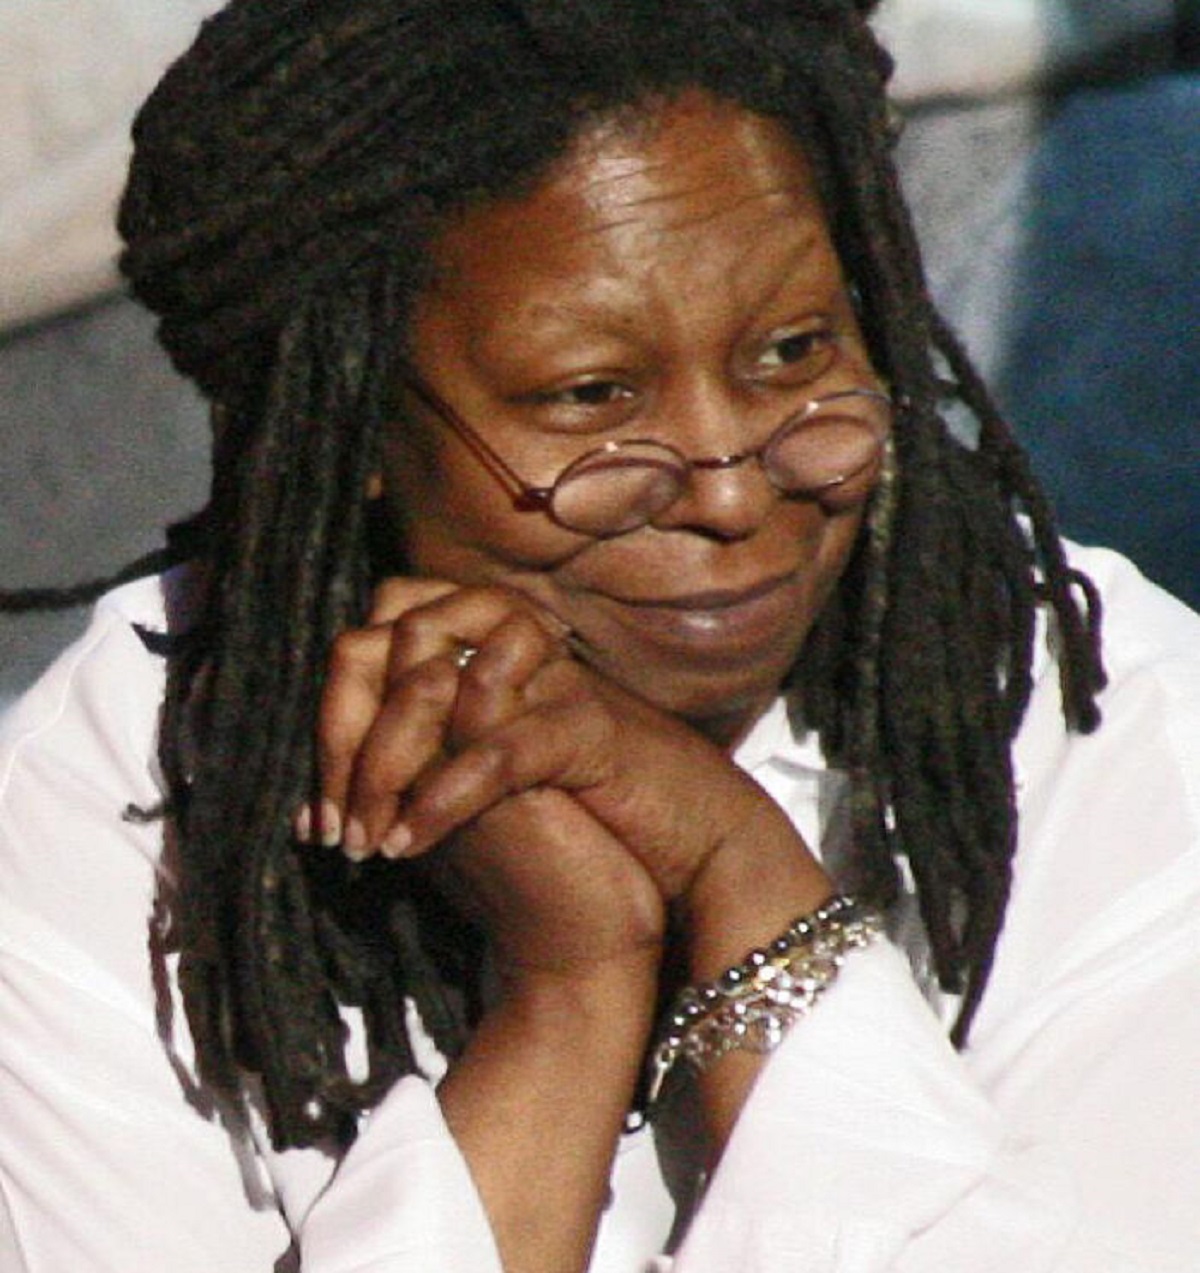 Whoopi Goldberg is the only person in the world to have won an Emmy, Grammy, Oscar, Tony, and Nickelodeon Kids' Choice Award.